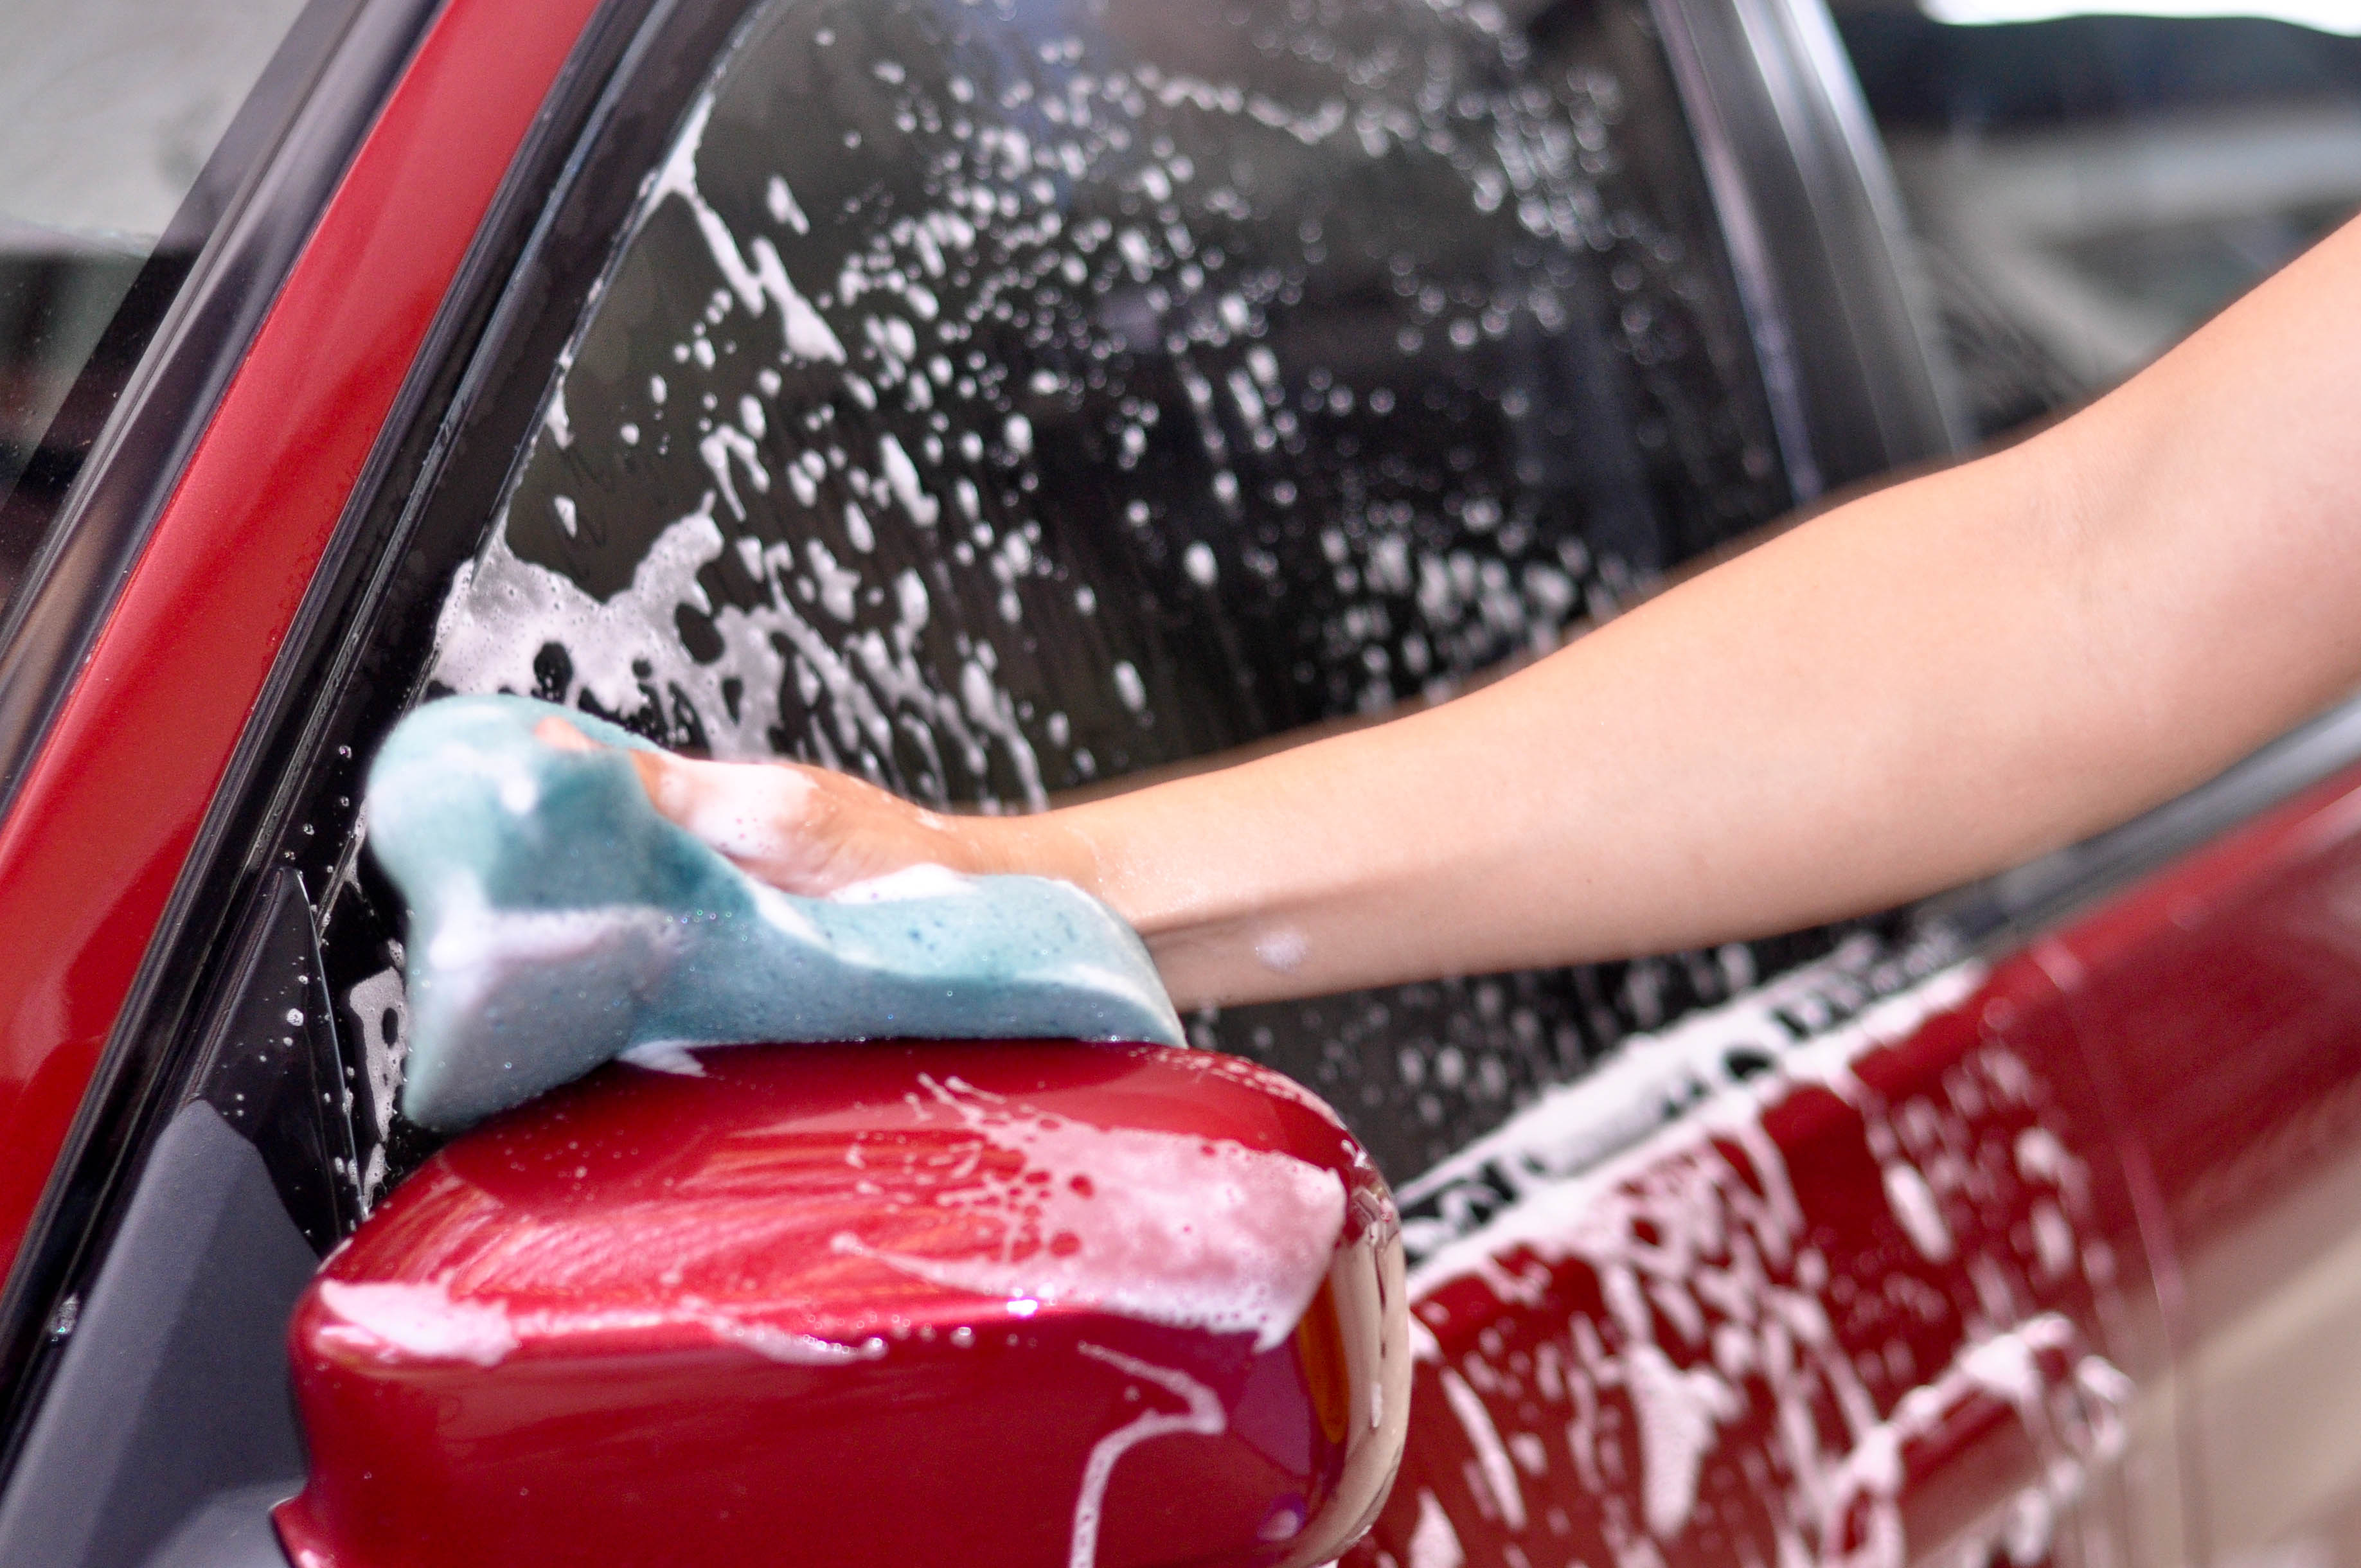 Pros And Cons Of Automatic Car Wash, Automatic Car Wash vs. Hand Car Wash: Pros and Cons,  car washes, wash a car,  best way to wash a car, vehicle owner,  automatic car wash,  automatic car wash safe,  keep car clean,  car's finish, remove dirt car,  wash car in sunlight, car soap,  Automatic Wash Benefits,  protective wax, Hand car Washing, hand car wash, bucket, soap,  scratch  vehicleâ€™s finish,  touchless car wash,  local car wash,  automatic waxing,  vintage vehicle,  automated car wash